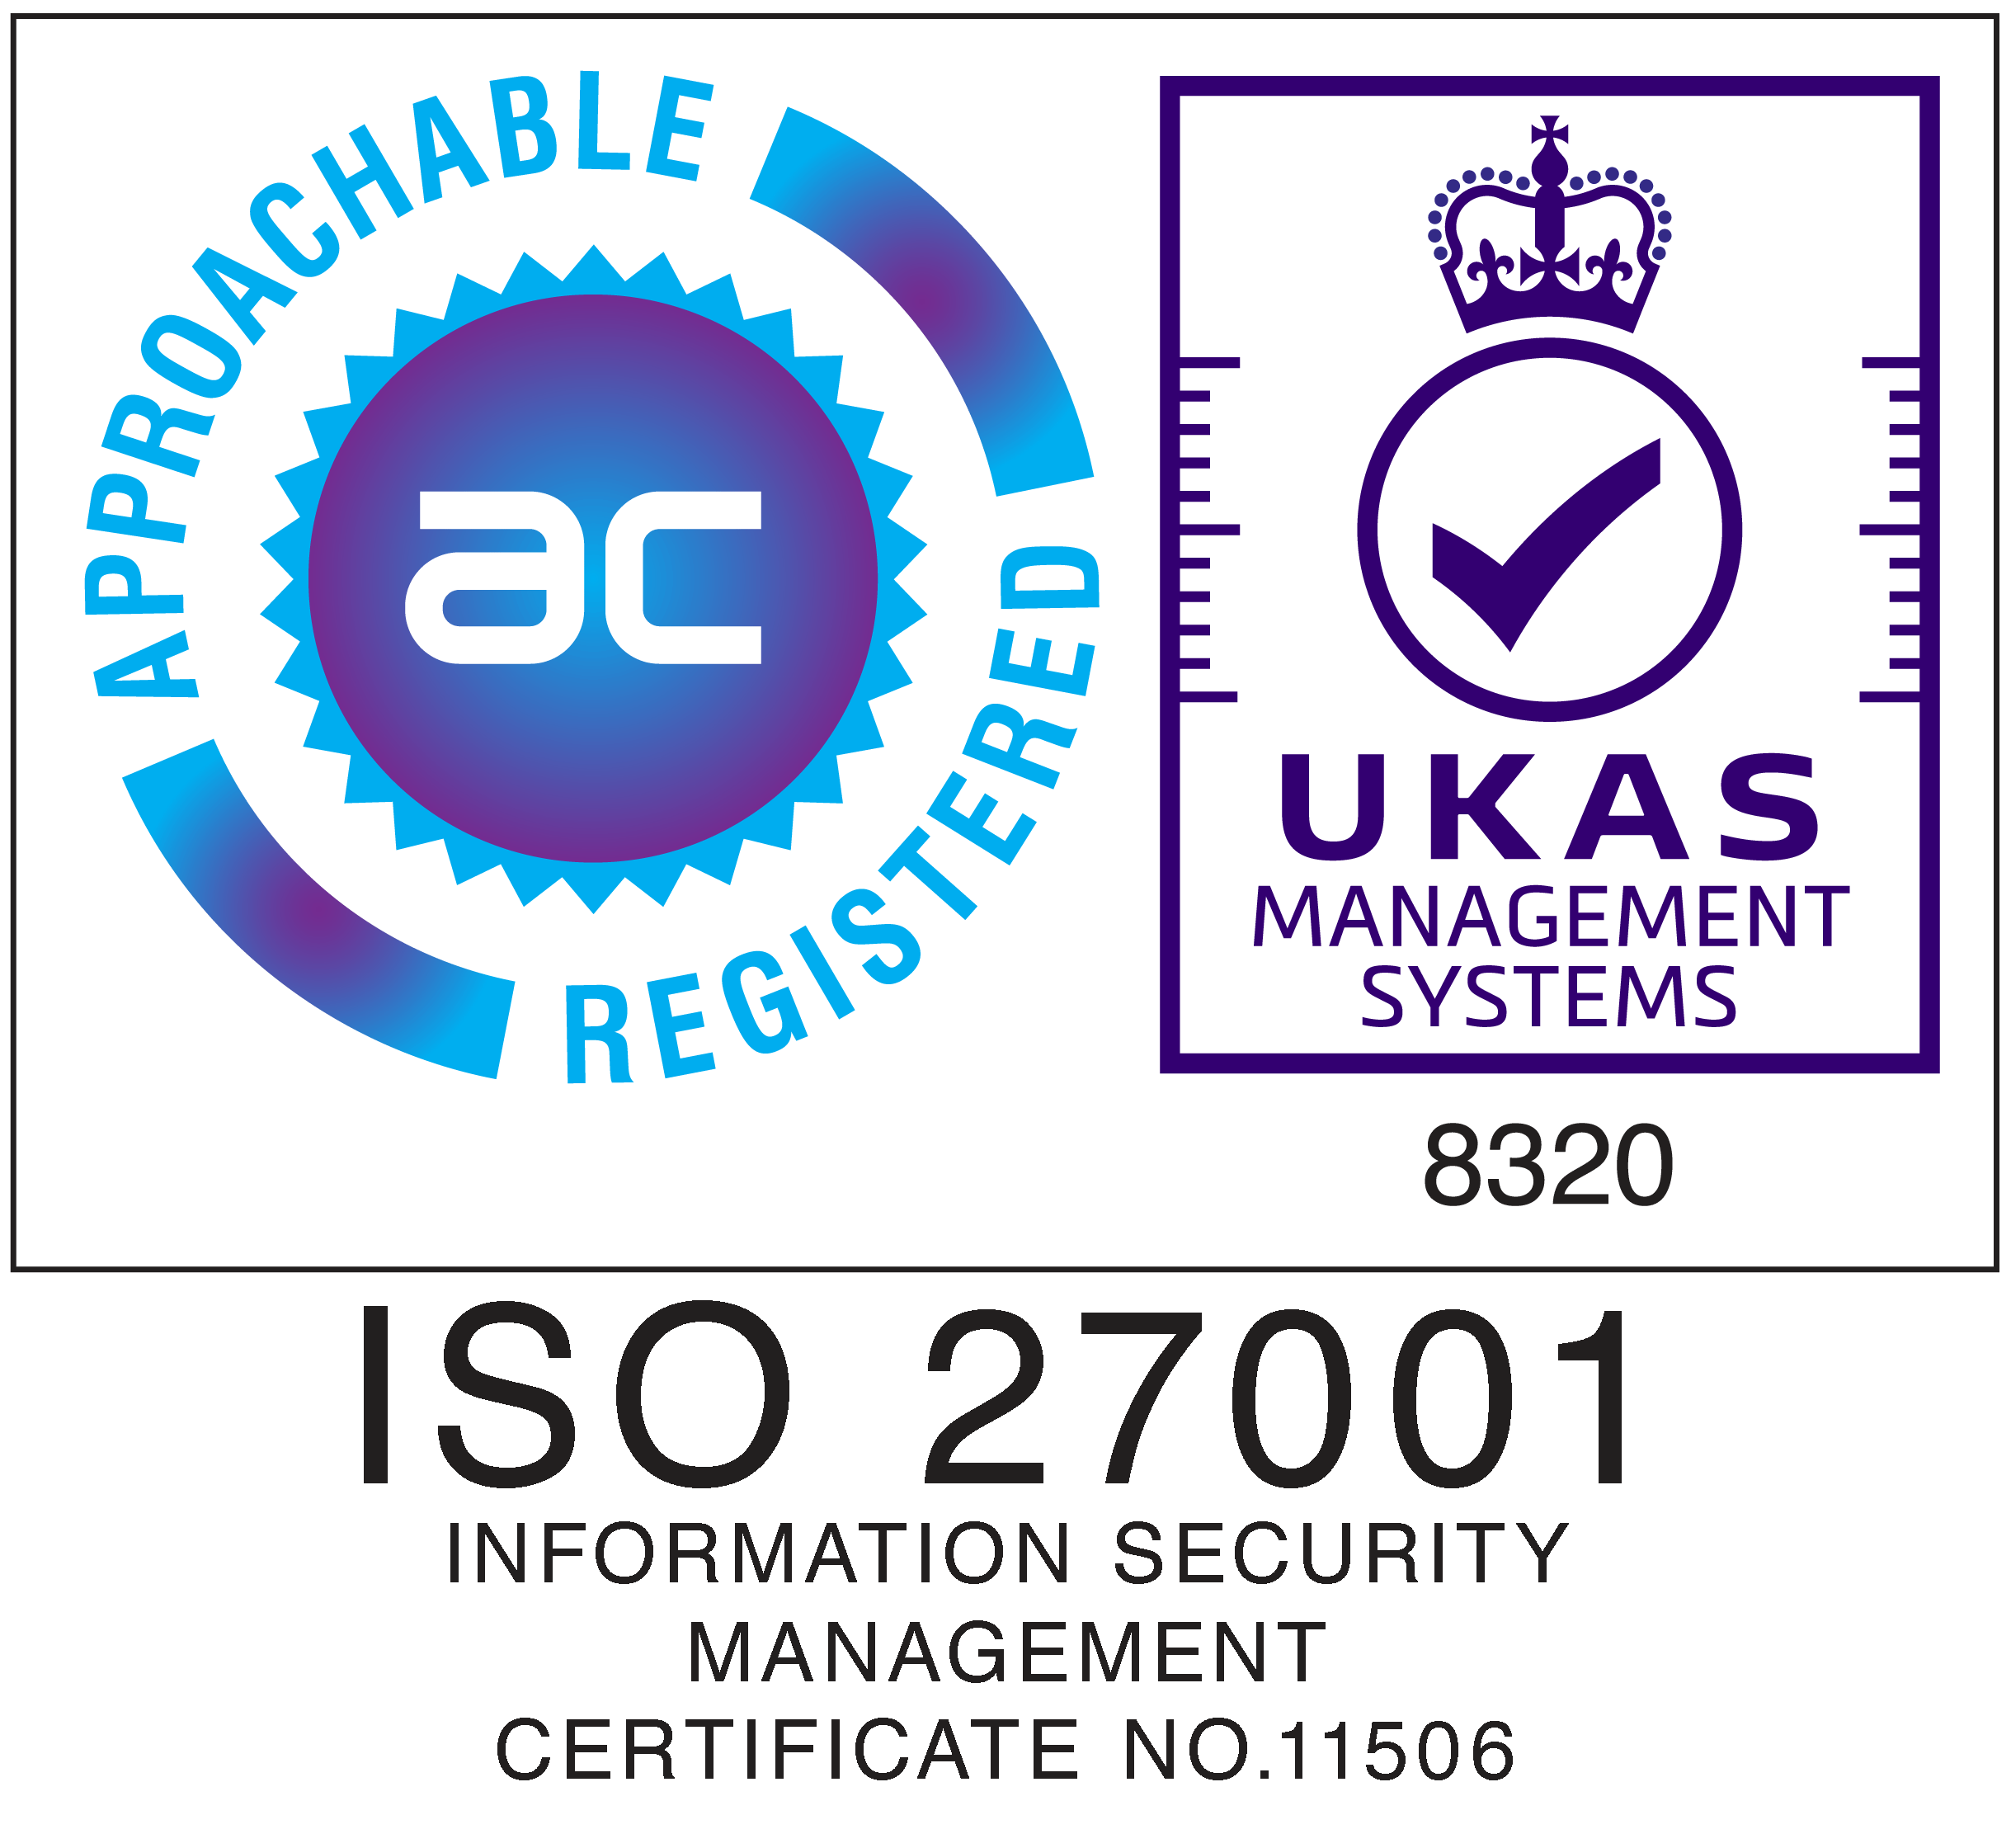 Image showing that Elateral holds an ISO 27001 certification